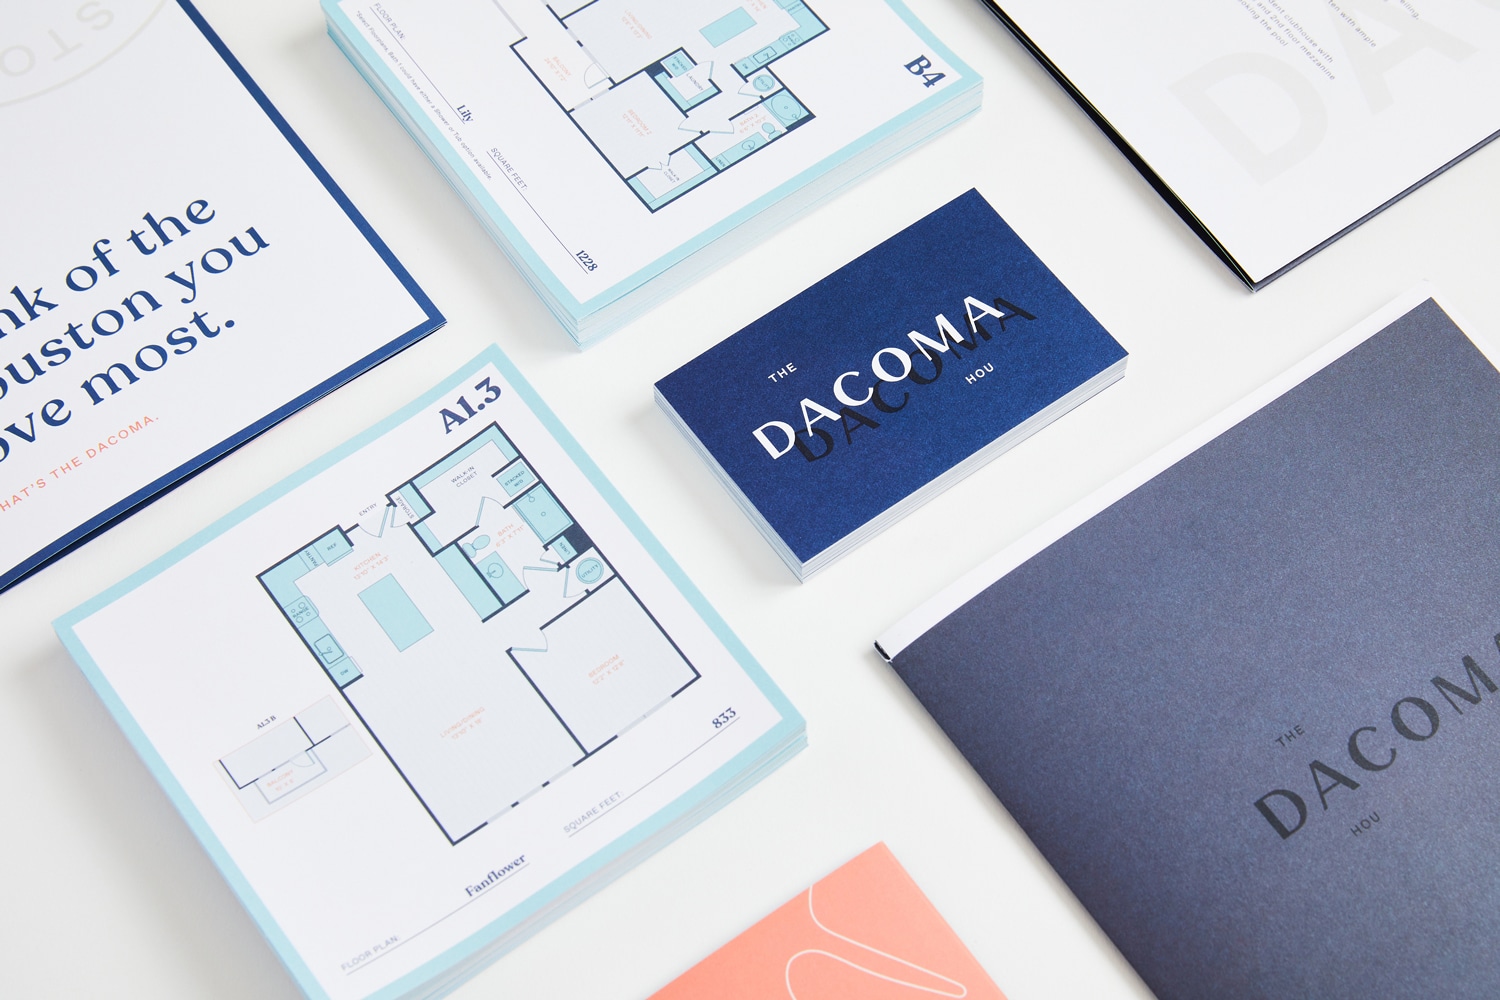 The Dacoma | SDCO Partners